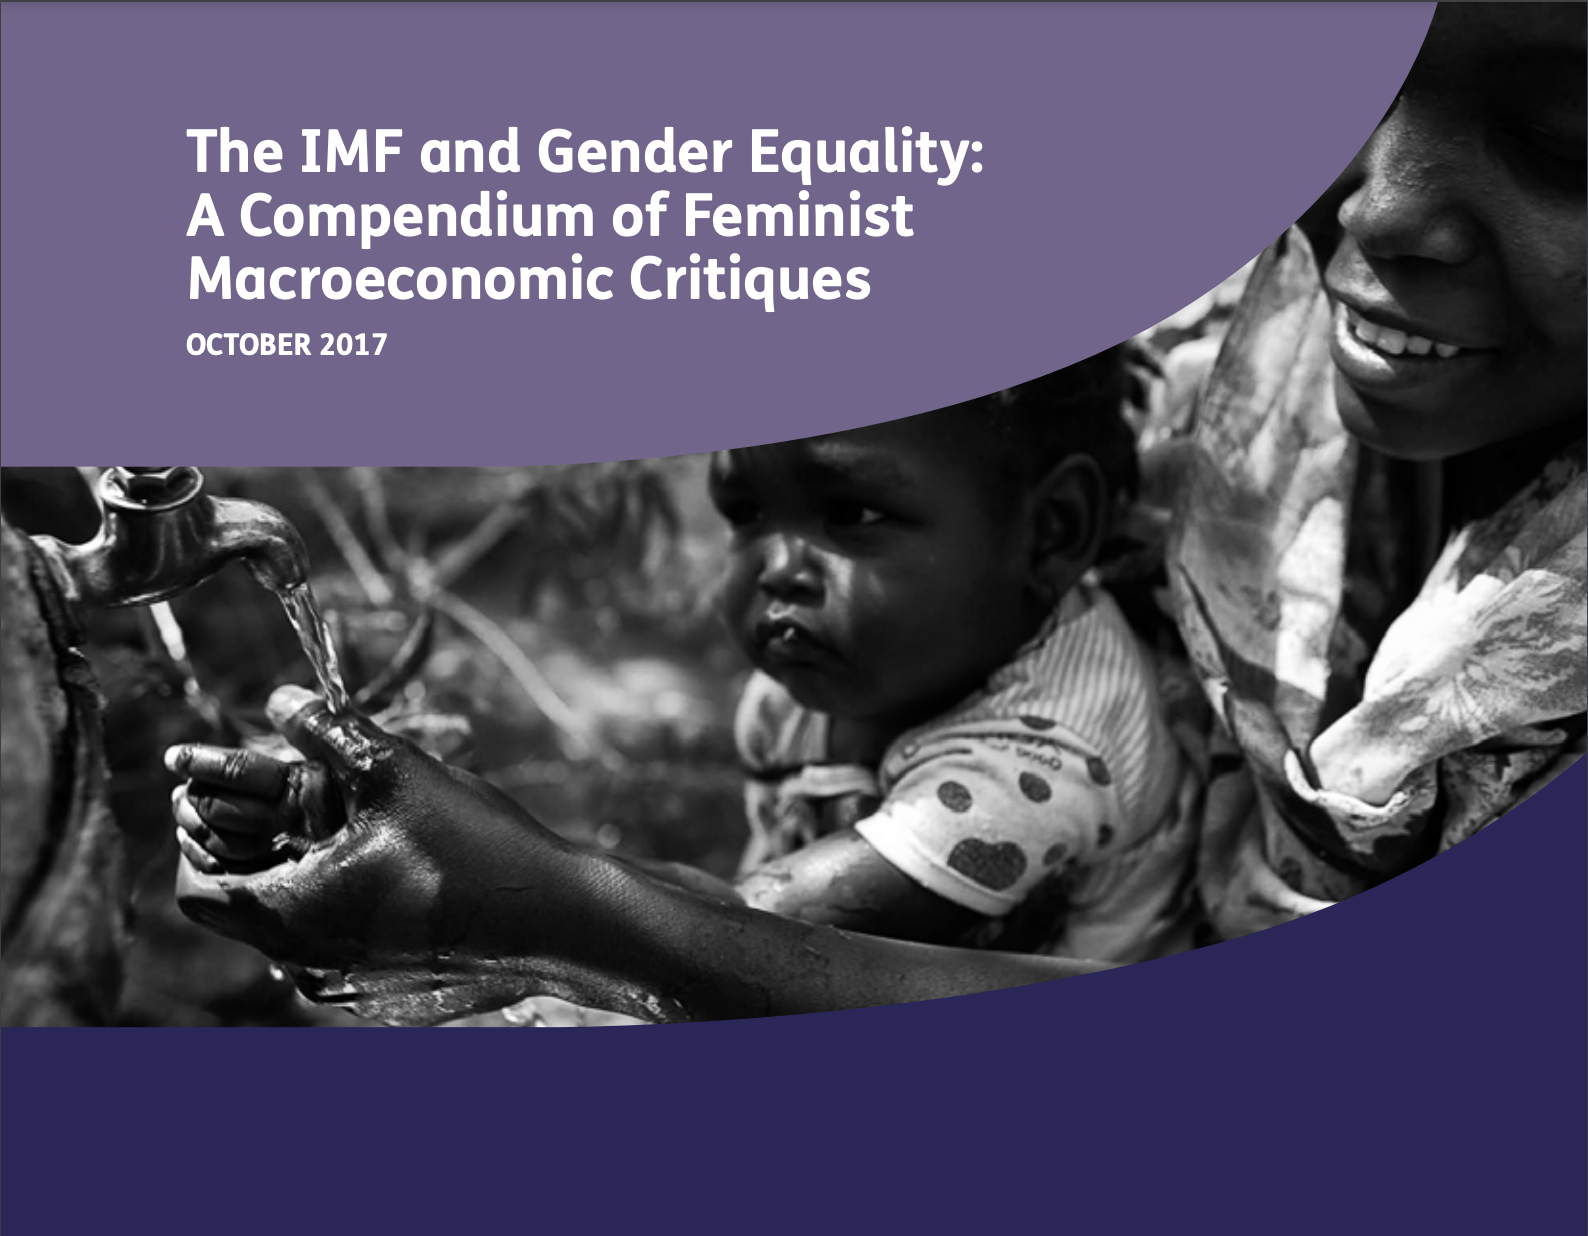 The IMF and Gender Equality Report October 2017